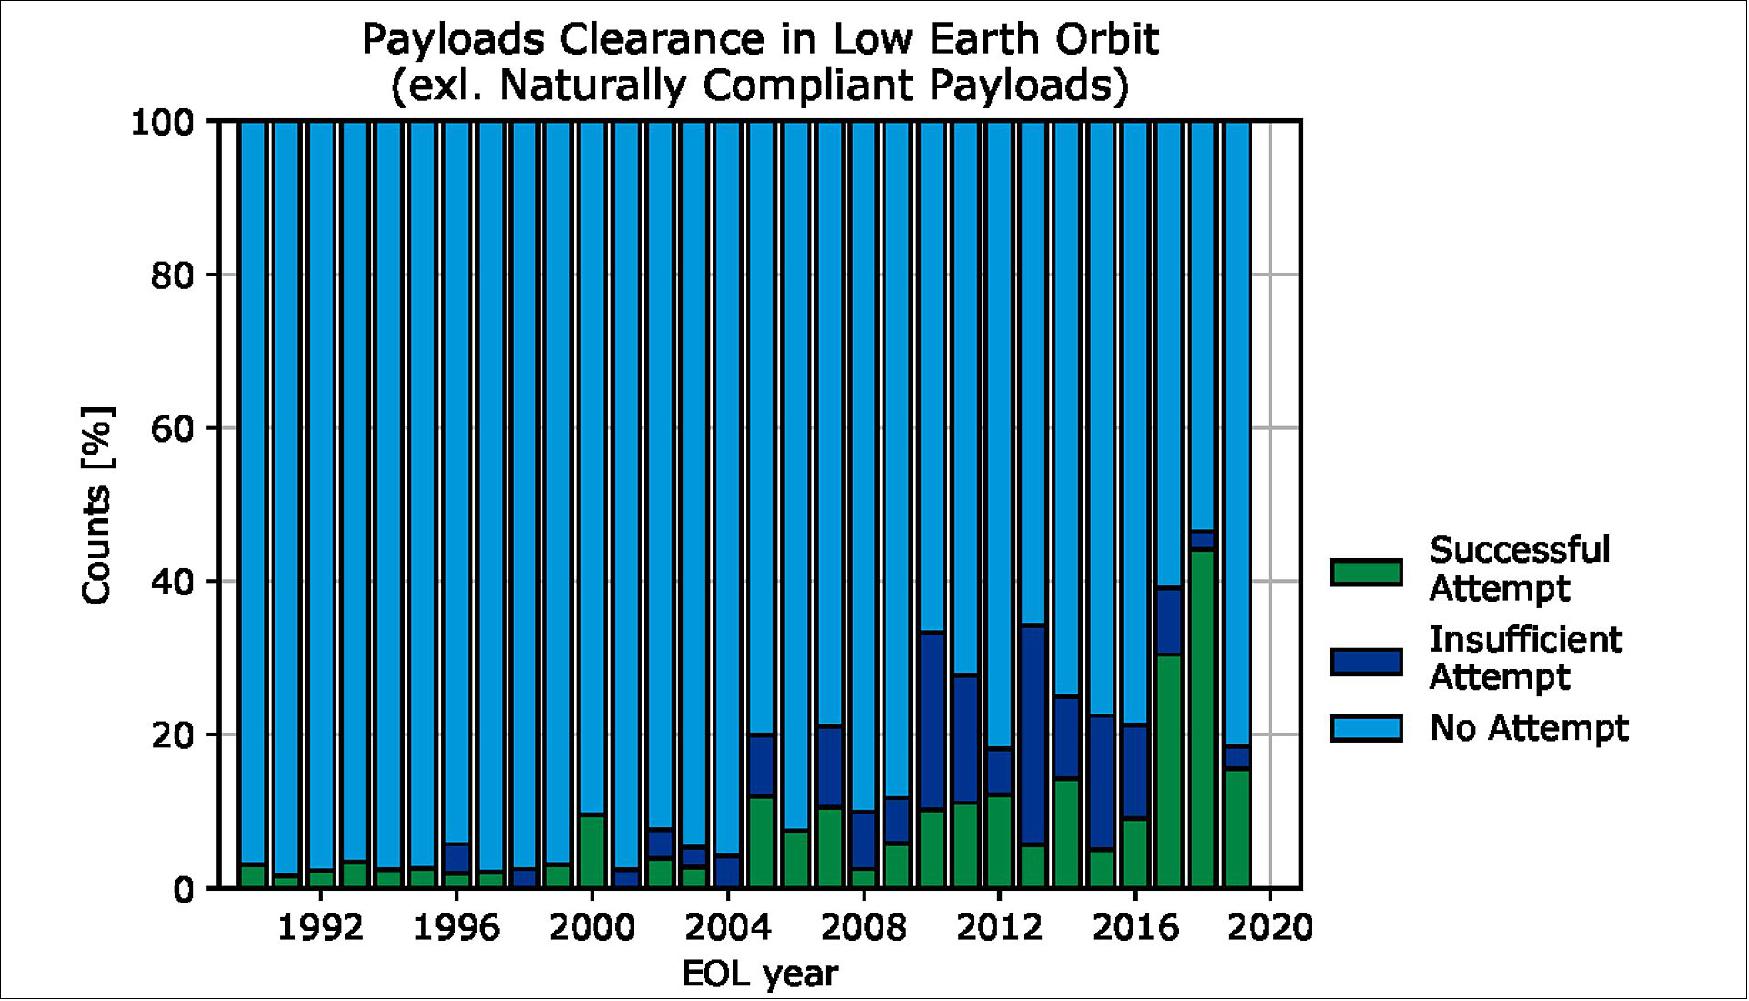 Figure 13: The gradual improvement of satellite disposal in low-Earth orbit is not enough. In low-Earth orbit, some “naturally compliant” objects safely burn up in the atmosphere without intervention. However, many others require intervention from the ground - more than half of the space actors operating these make no attempt to sustainably dispose of their missions. While the numbers are improving, it is not fast enough (image credit: ESA)